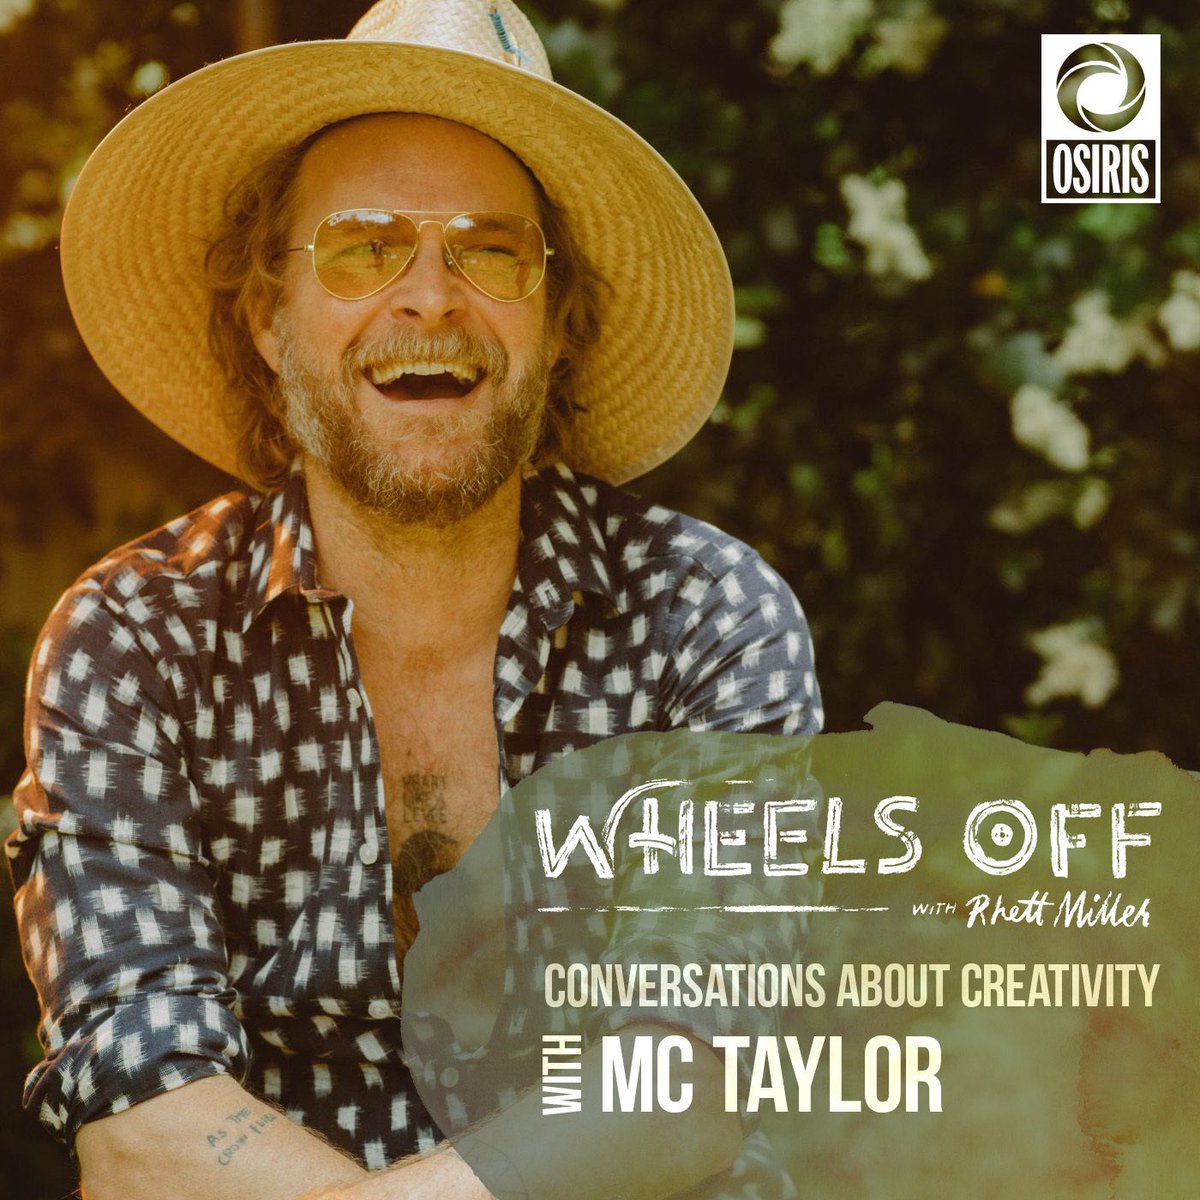 “What is music if not, like, this beautiful mystery that encourages very personal interpretations?” M.C. Taylor aka @hissgoldenmessenger is a brilliant sweetheart. Please check out the newest #WheelsOff - you’ll love it!